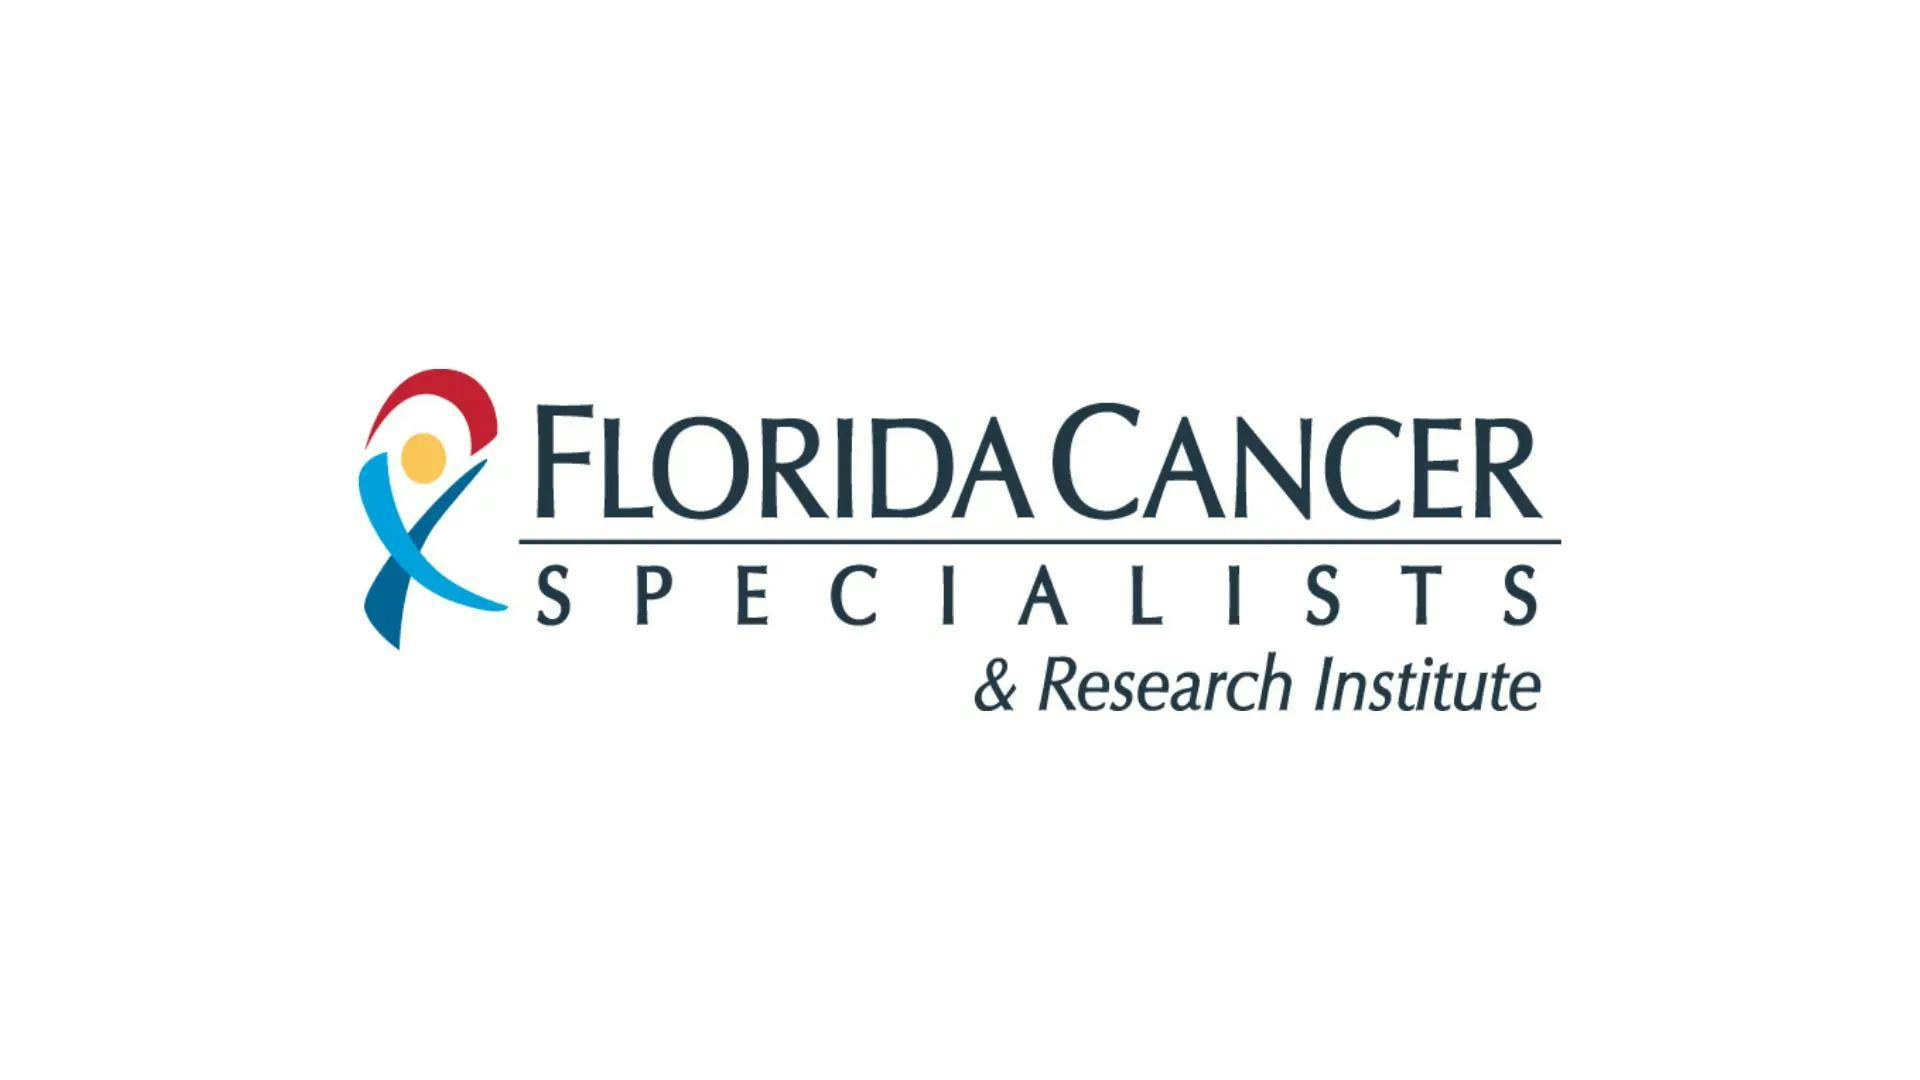 Florida Cancer Specialists & Research Institute Innovations in Precision Oncology Informatics Showcased at World Conference